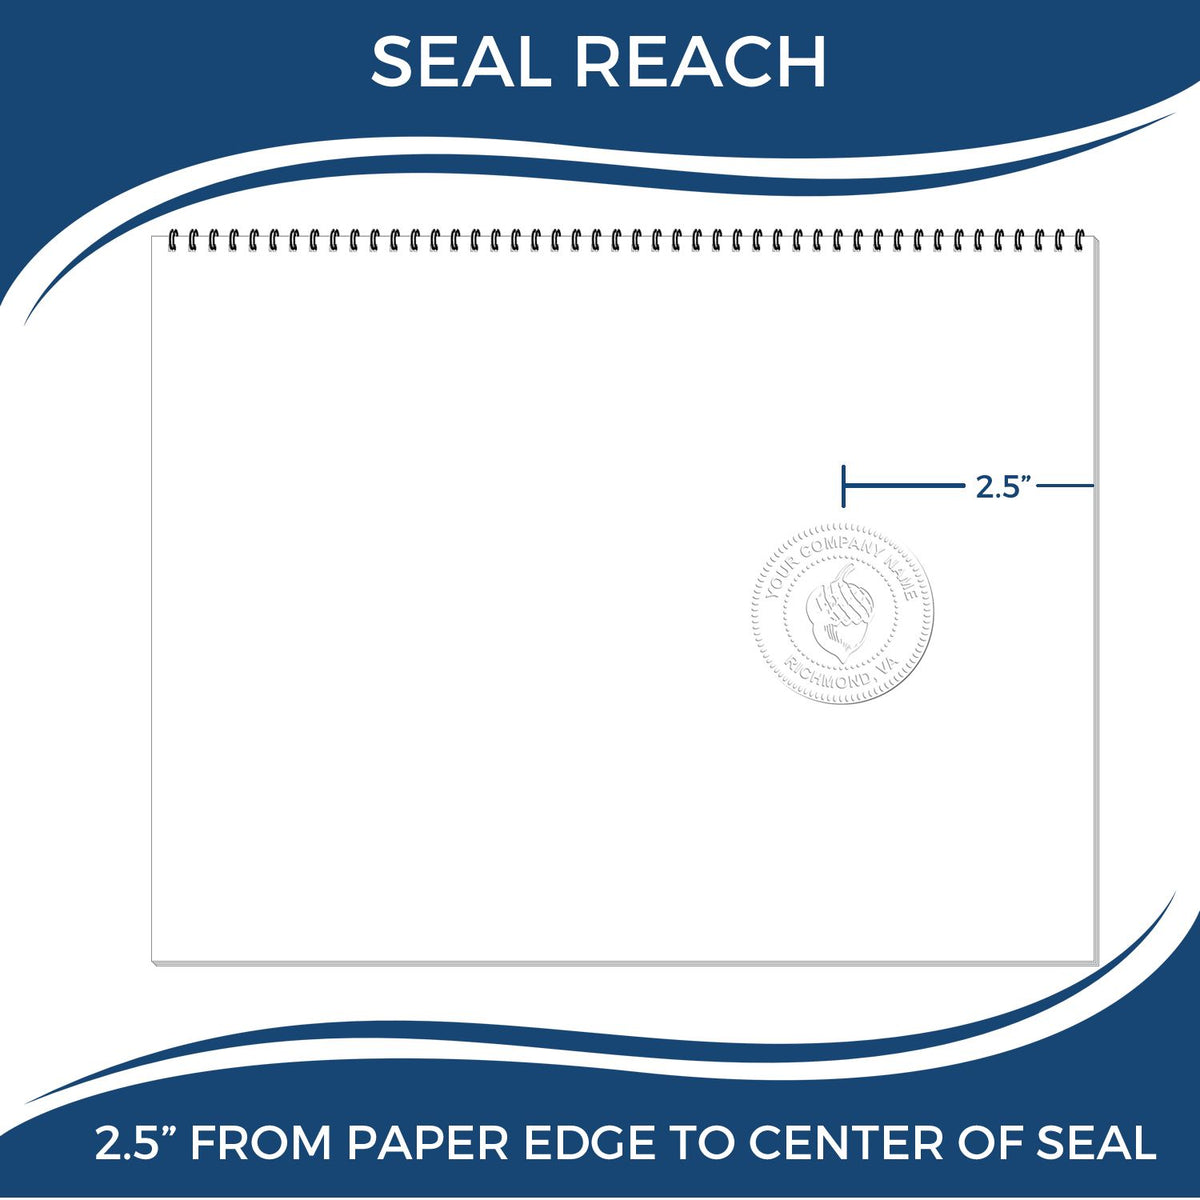 An infographic showing the seal reach which is represented by a ruler and a miniature seal image of the Heavy Duty Cast Iron Iowa Geologist Seal Embosser